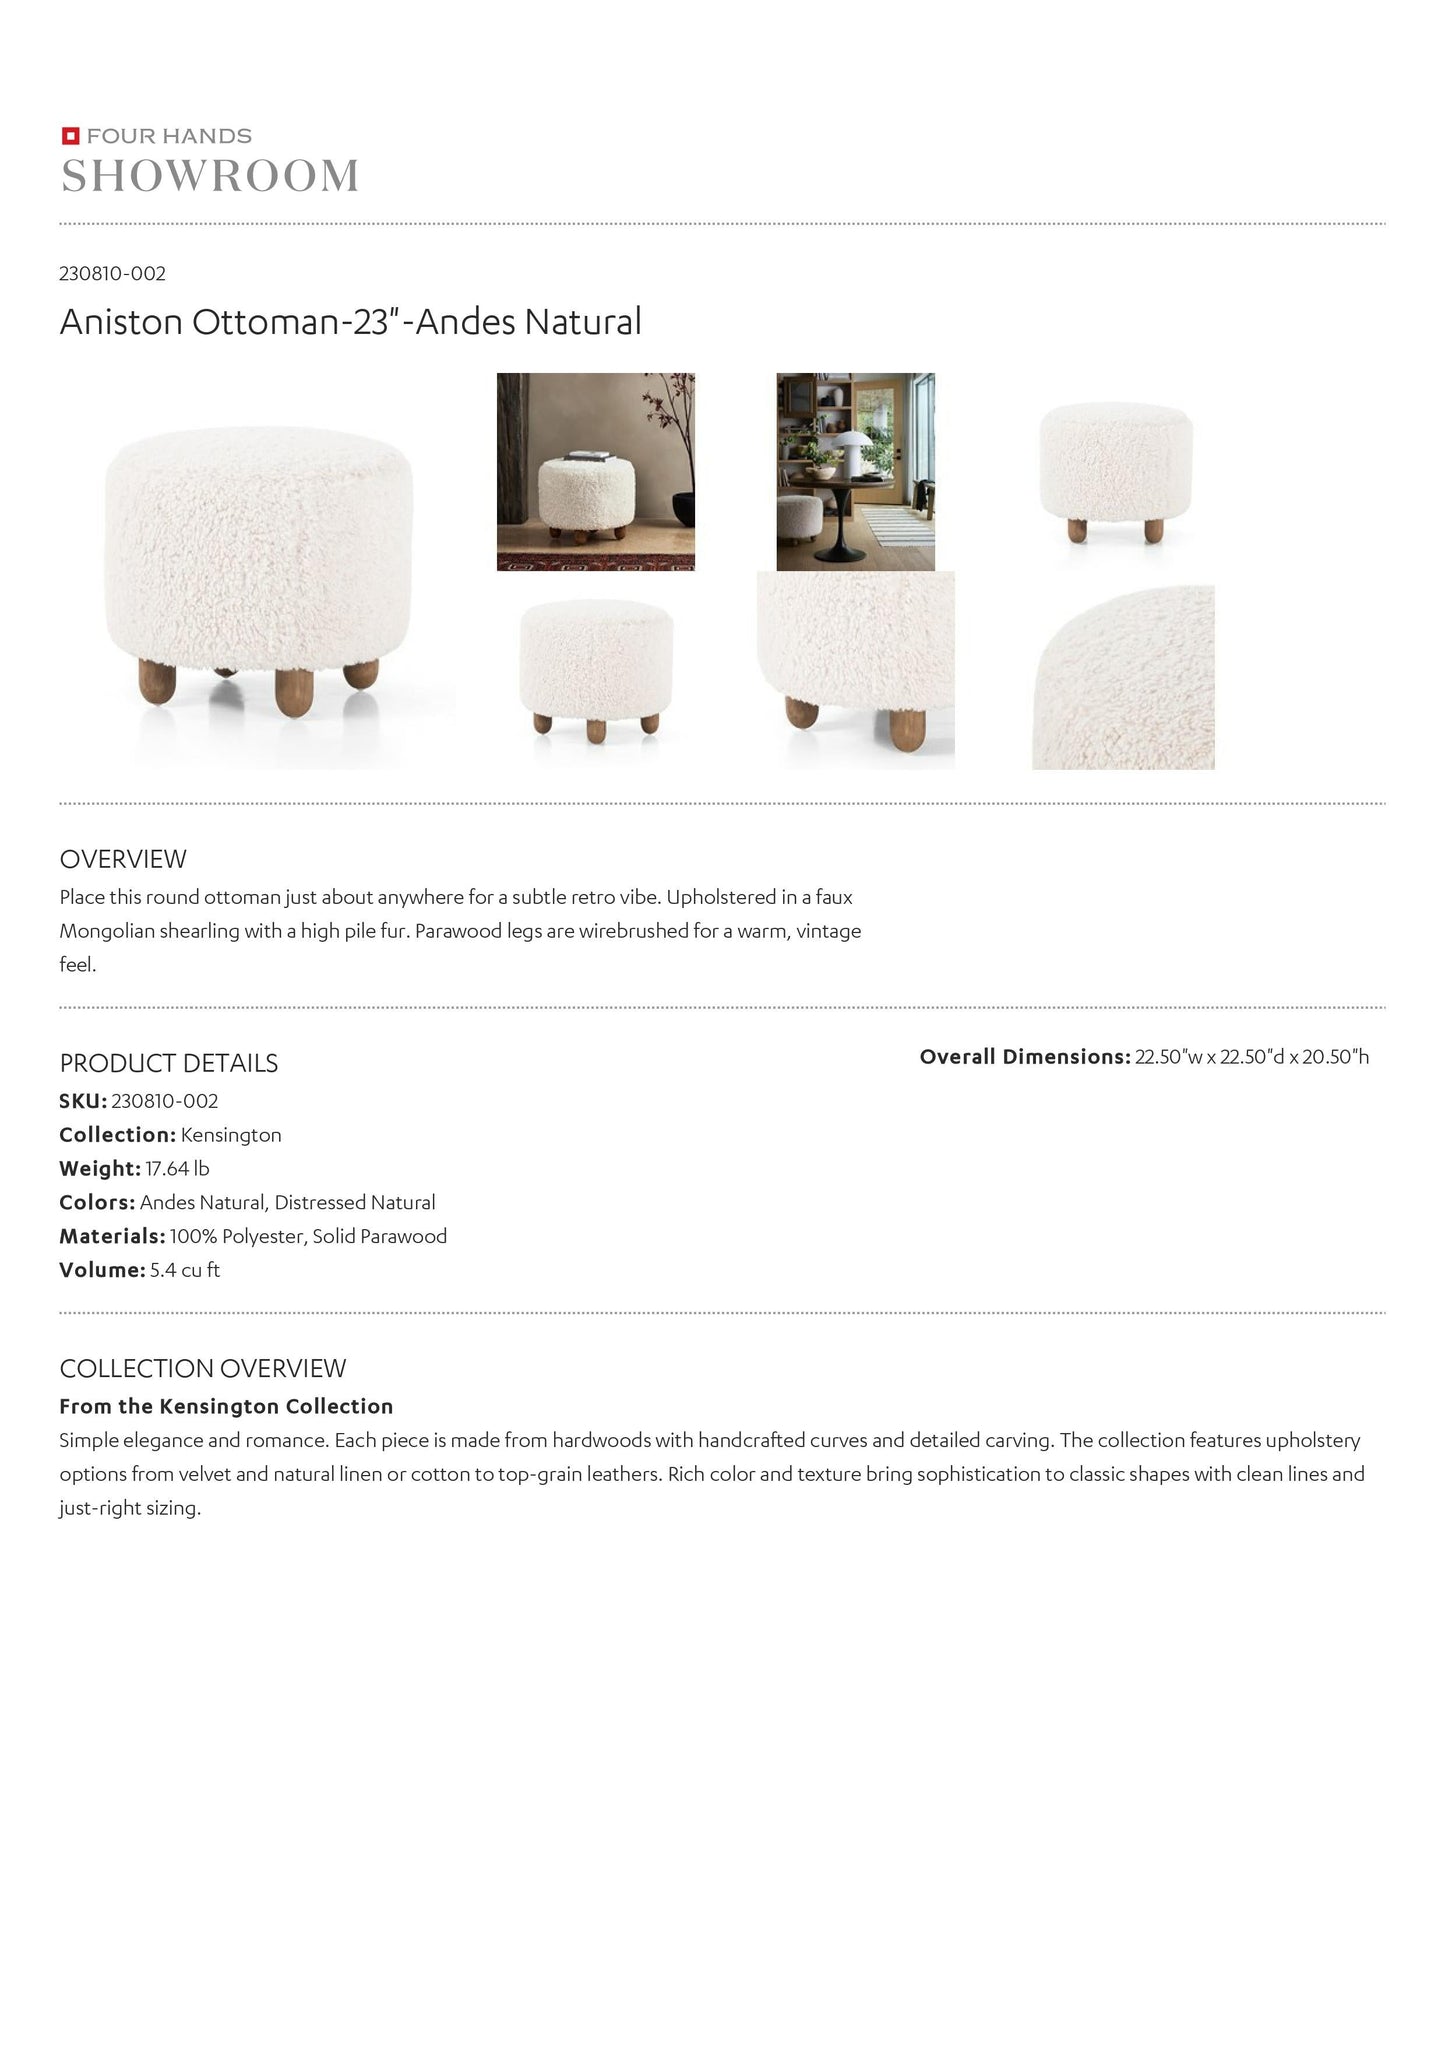 four hands aniston ottoman andes natural tearsheet